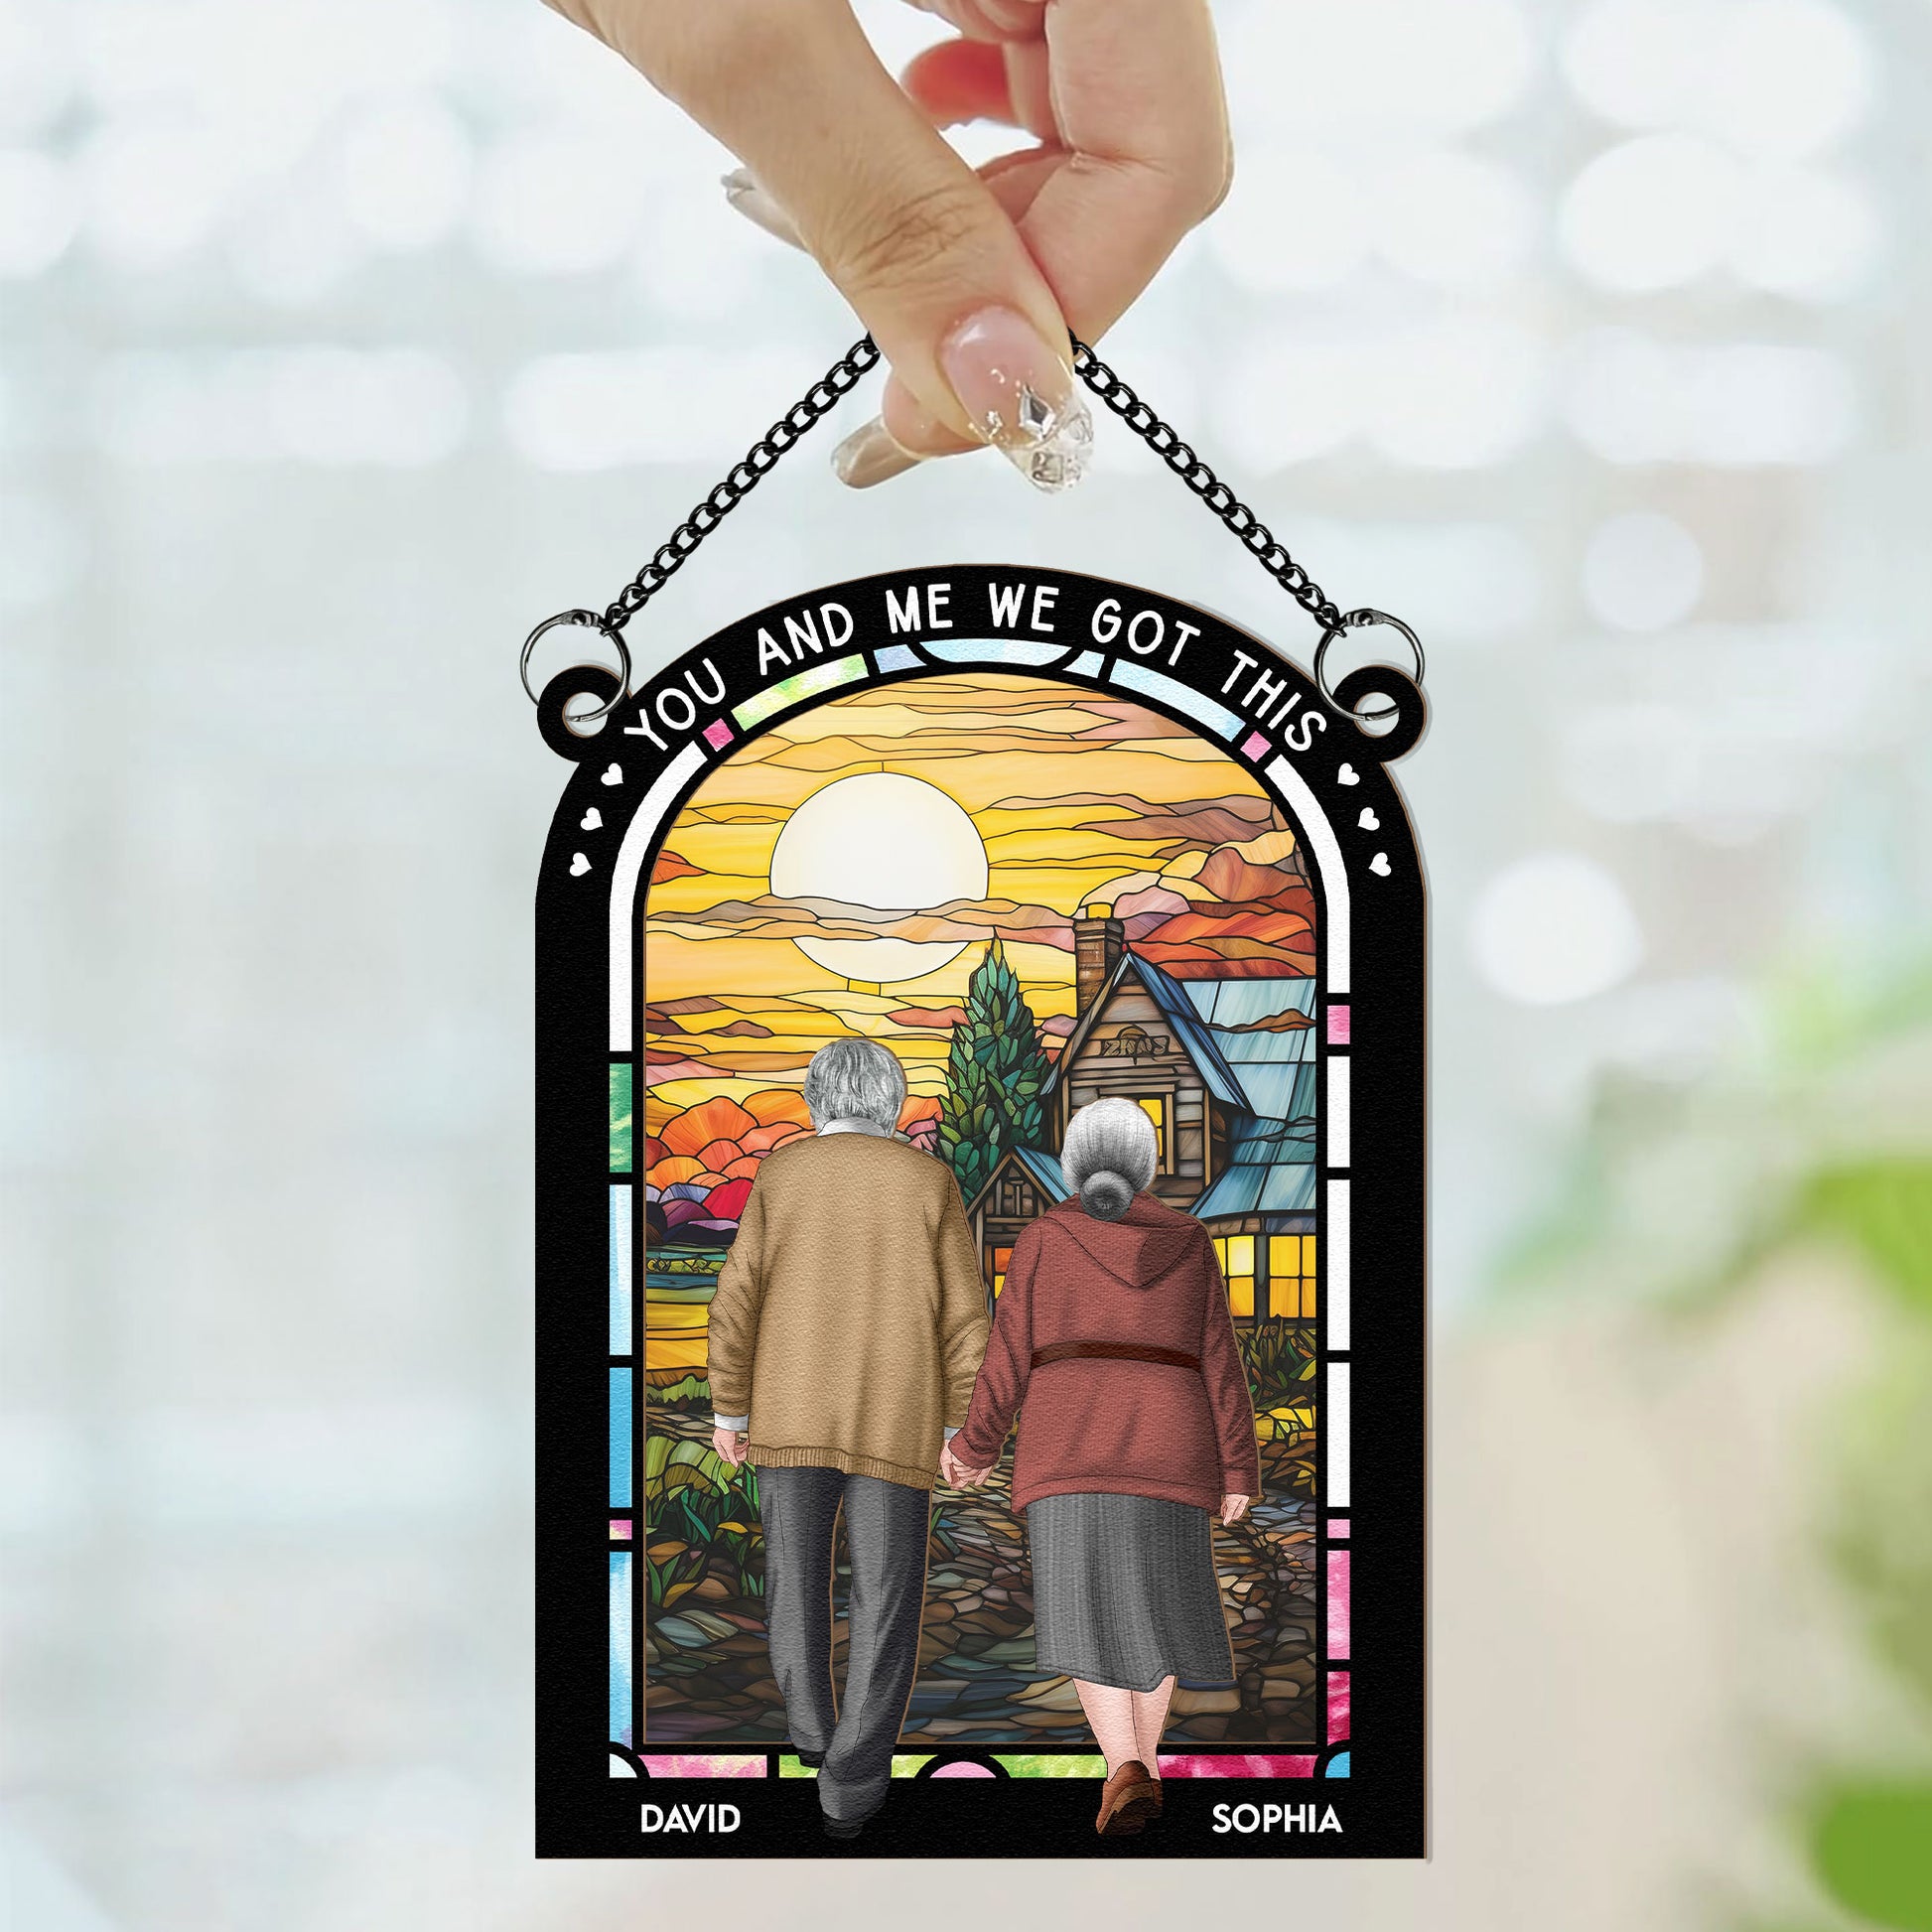 You And Me We Got This - Personalized Window Hanging Suncatcher Ornament